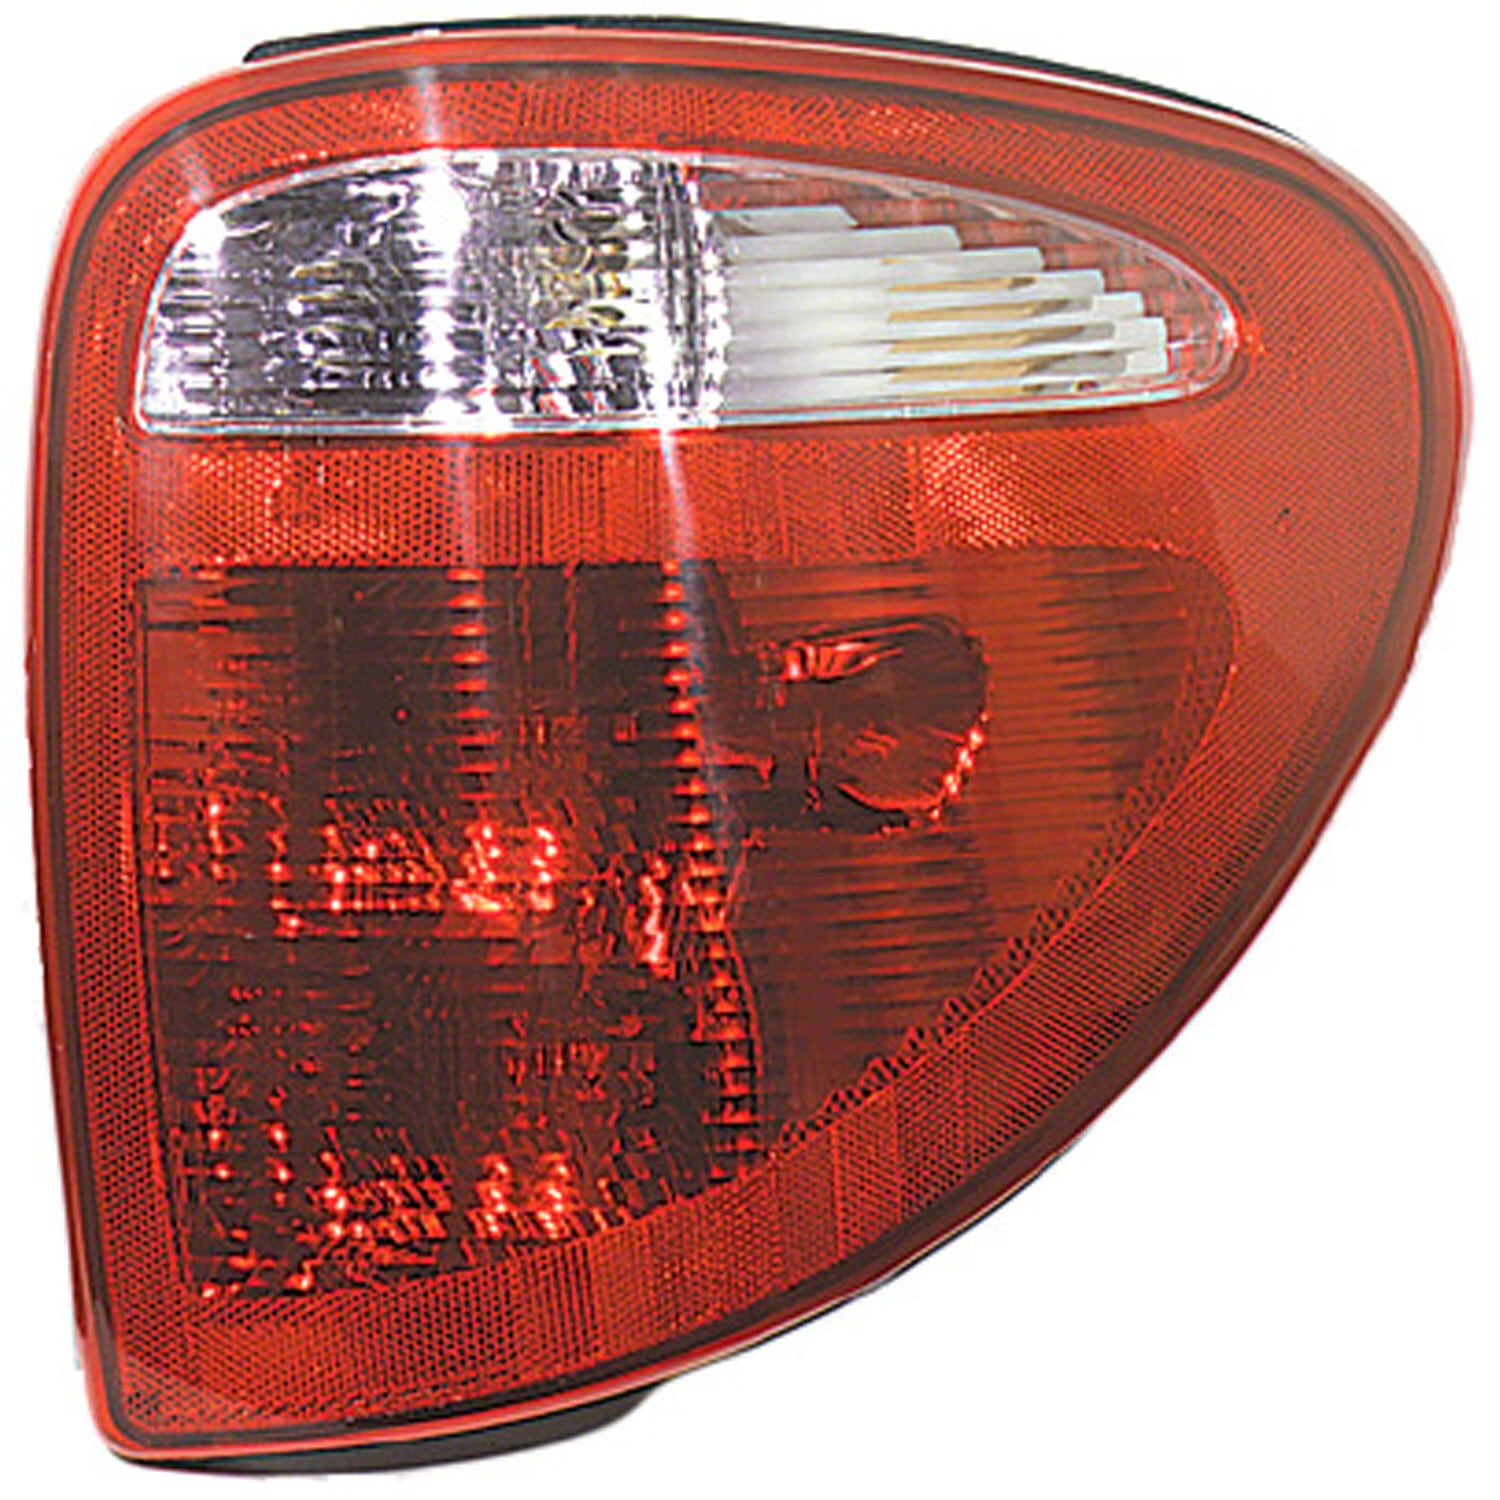 Action Crash Parts, New Economy Replacement Right Tail Light Assembly, Fits 2001-2003 Chrysler Chrysler Town And Country Tail Light Assembly